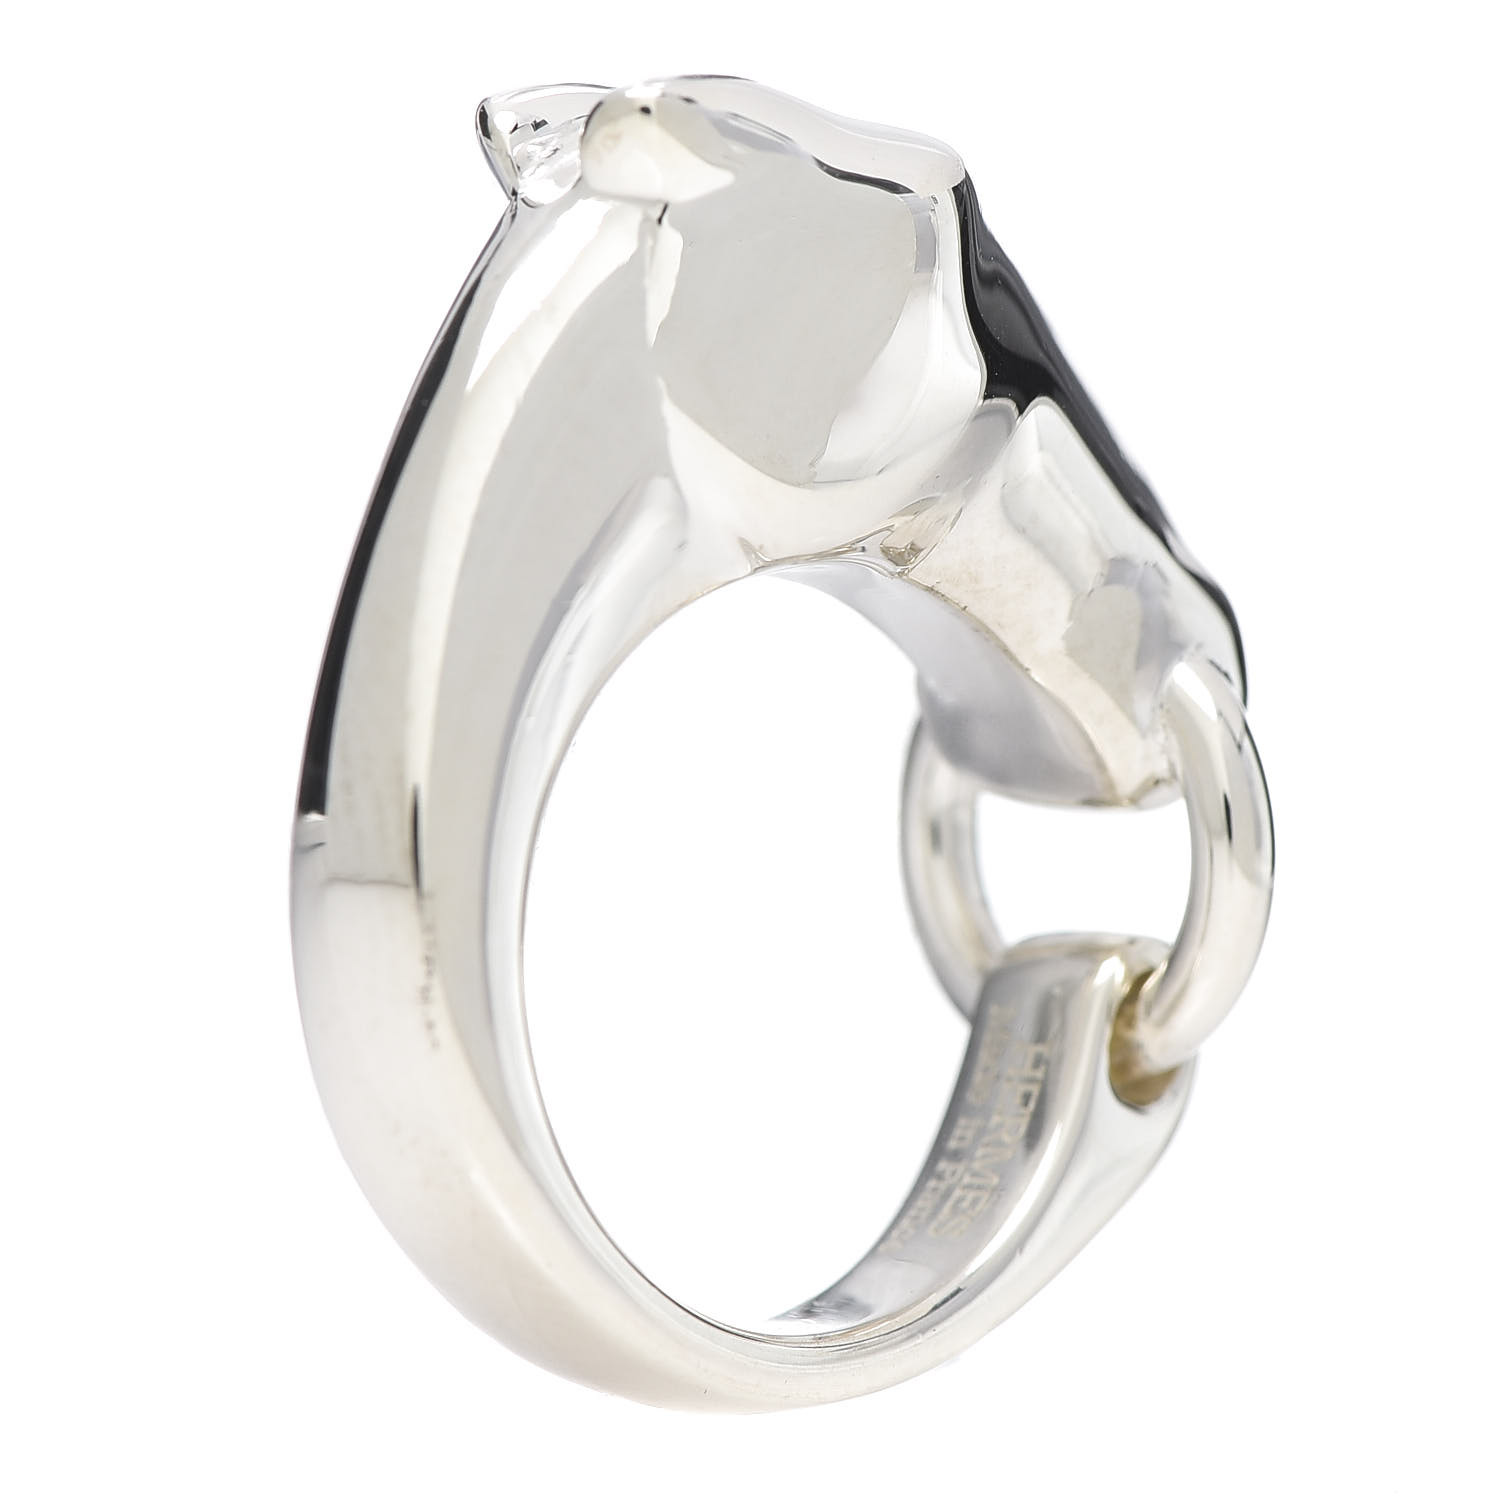 HERMES Sterling Silver PM Galop Ring 50 5.25 611967